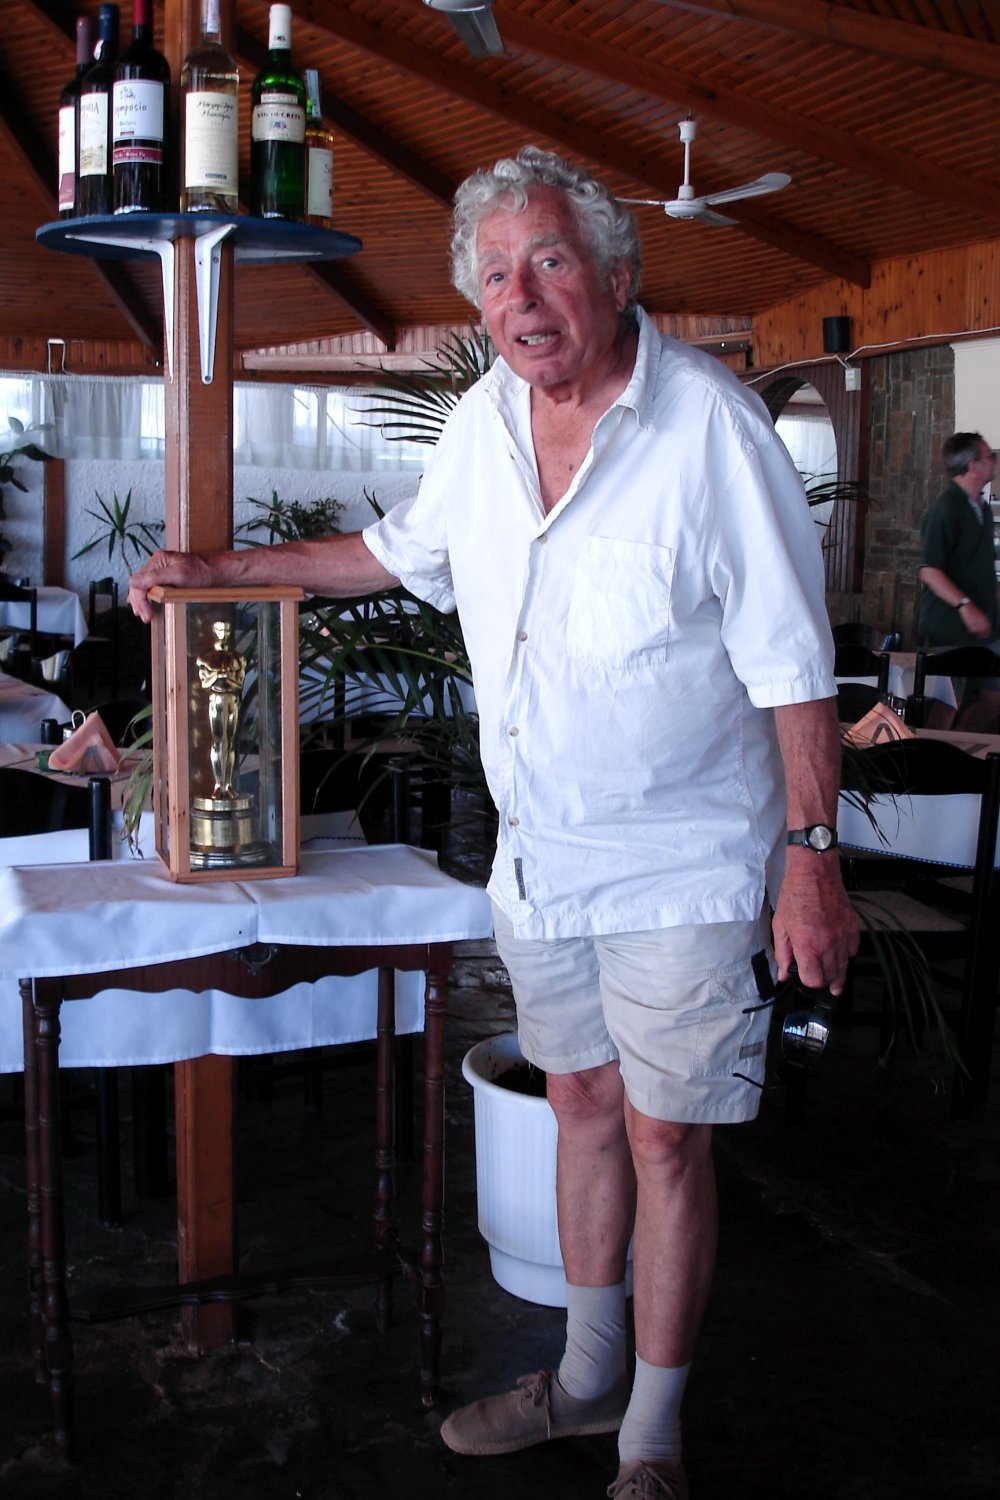 Walter Lassally with the Oscar he won for best blanc and white cinematography on Michael Cacoyannis’ Zorba the Greek in 1964, in his local taverna in Crete in 2006.